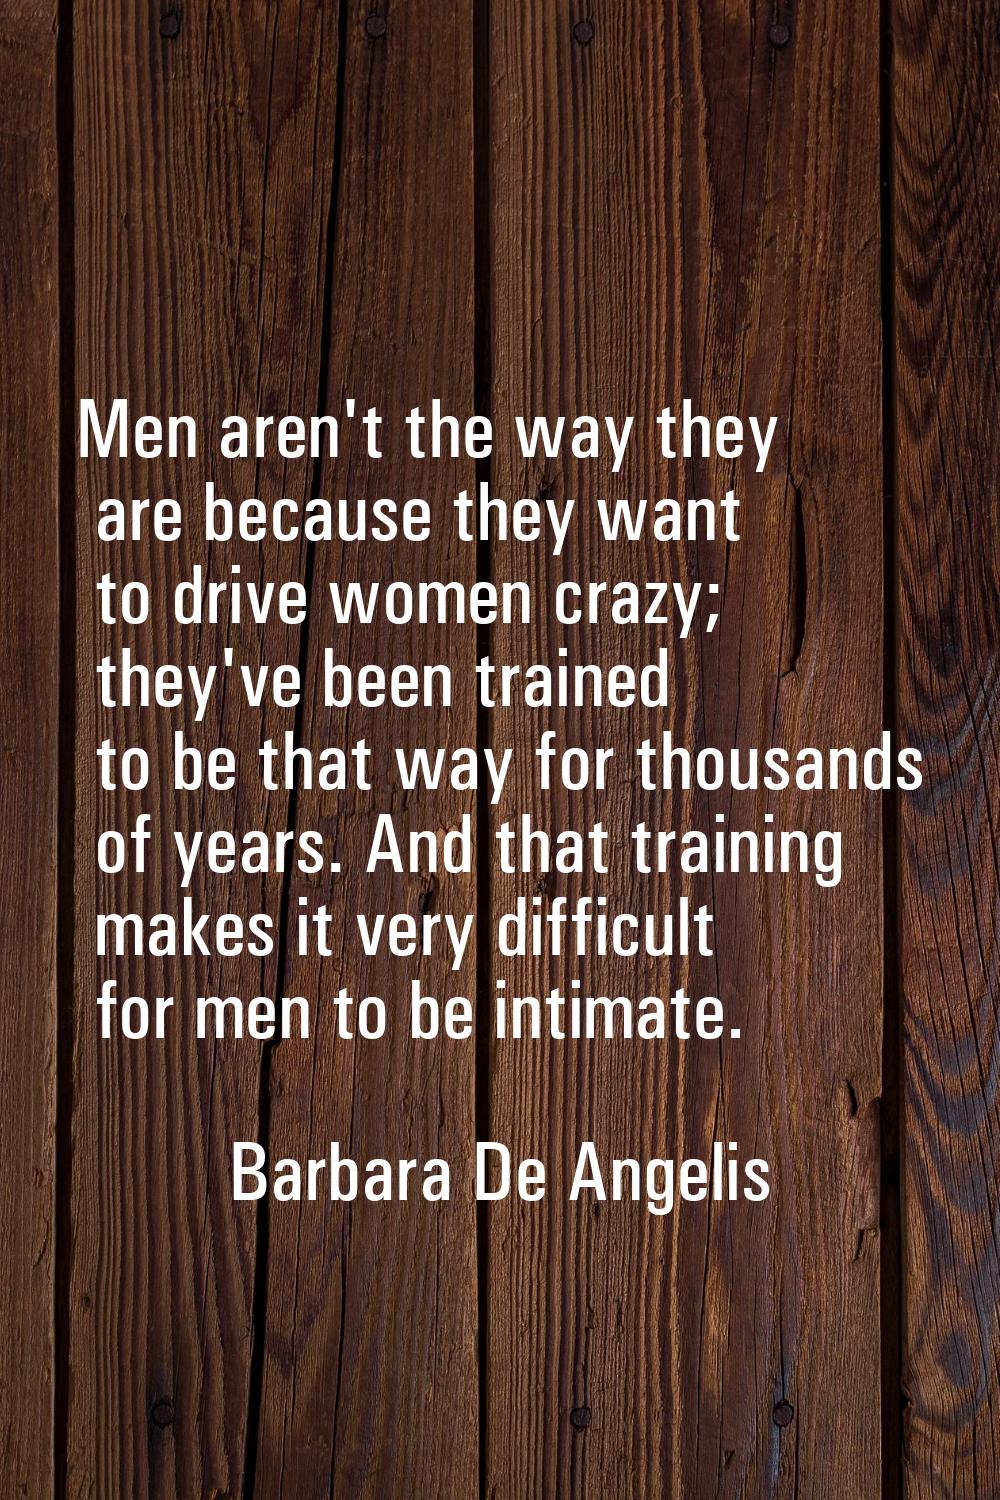 Men aren't the way they are because they want to drive women crazy; they've been trained to be that